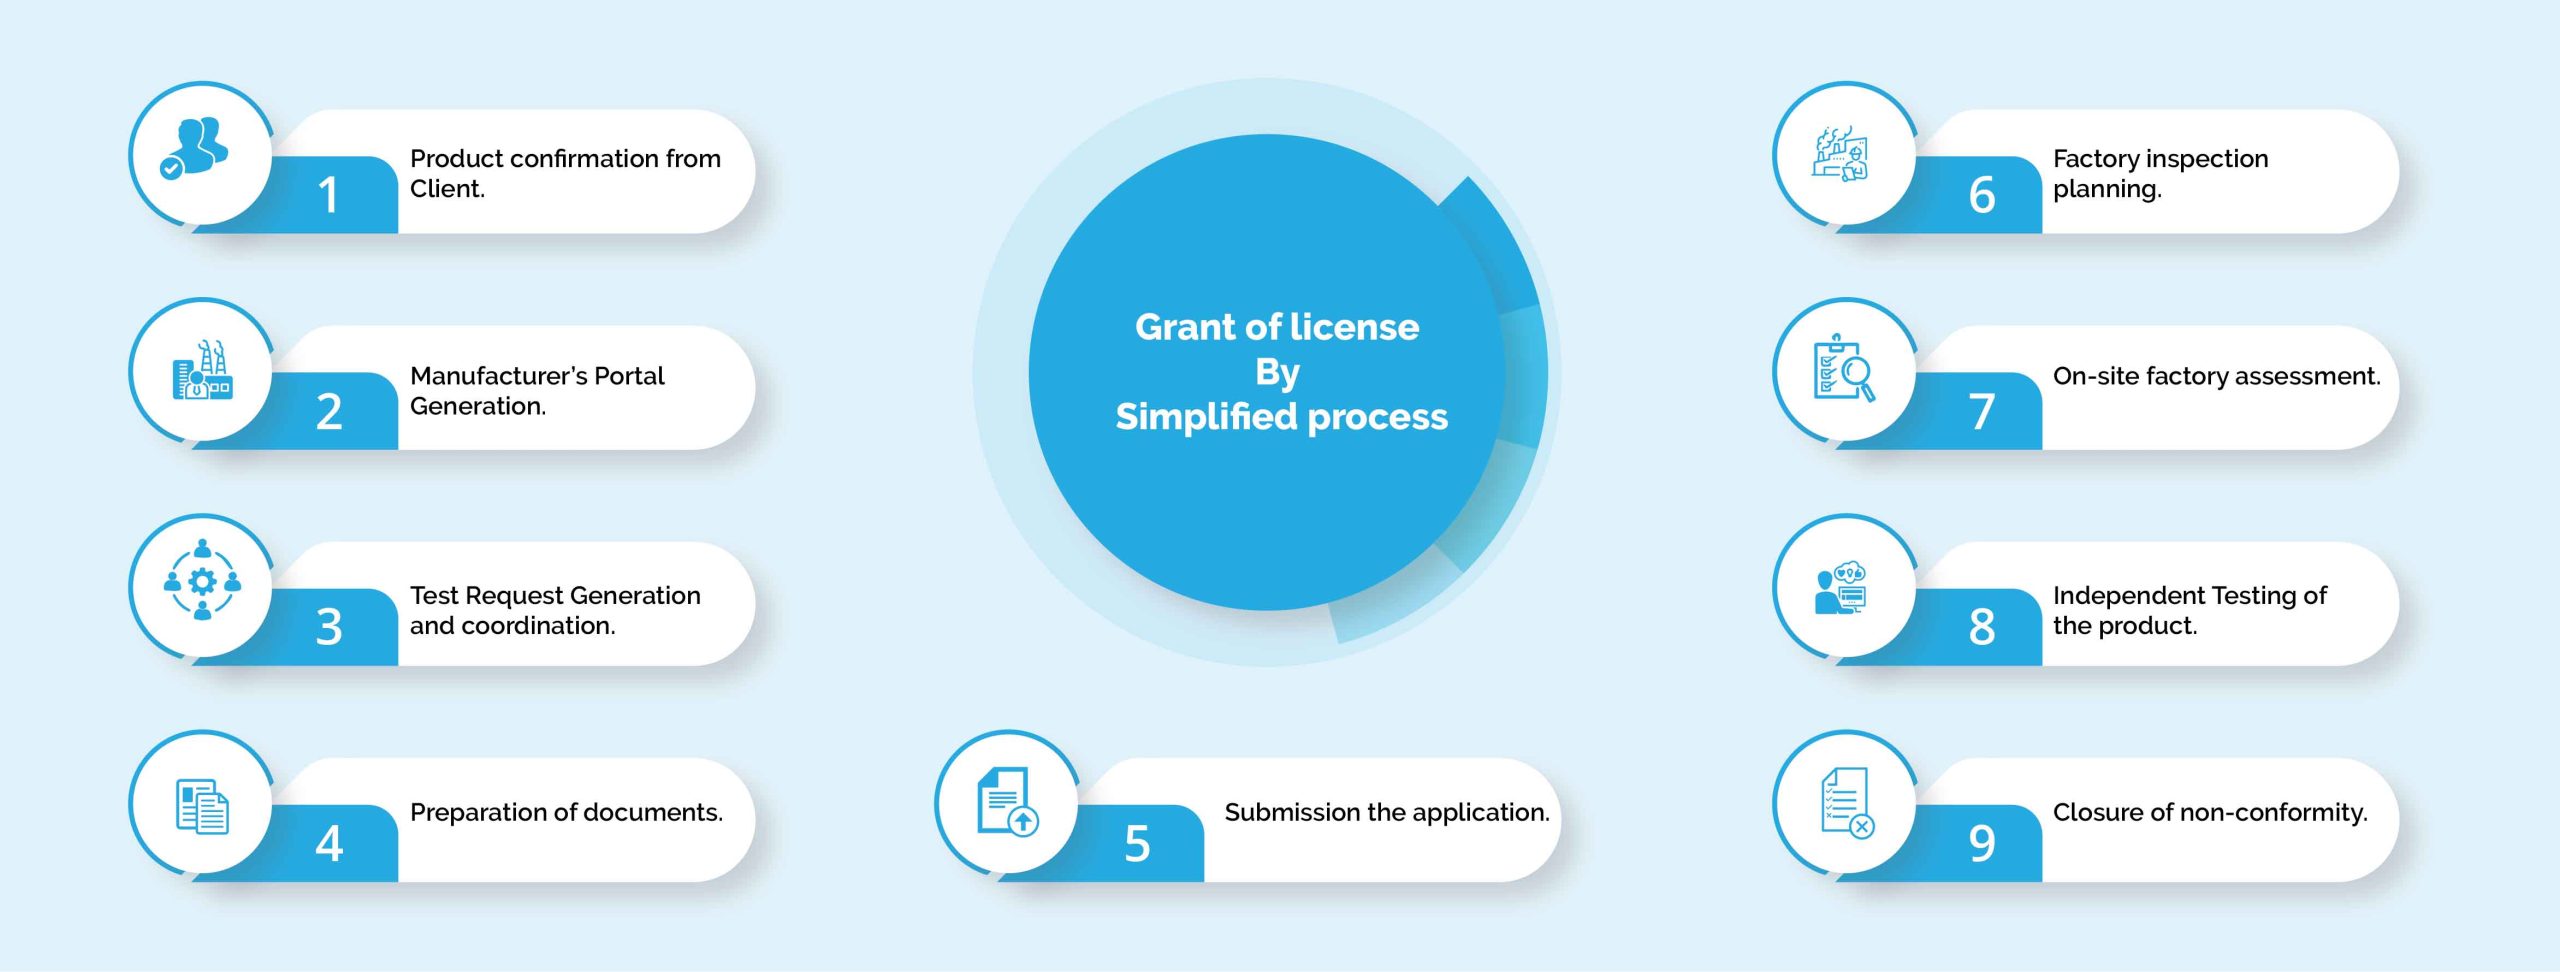 GRANT OF LICENSE BY SIMPLIFIED PROCESS